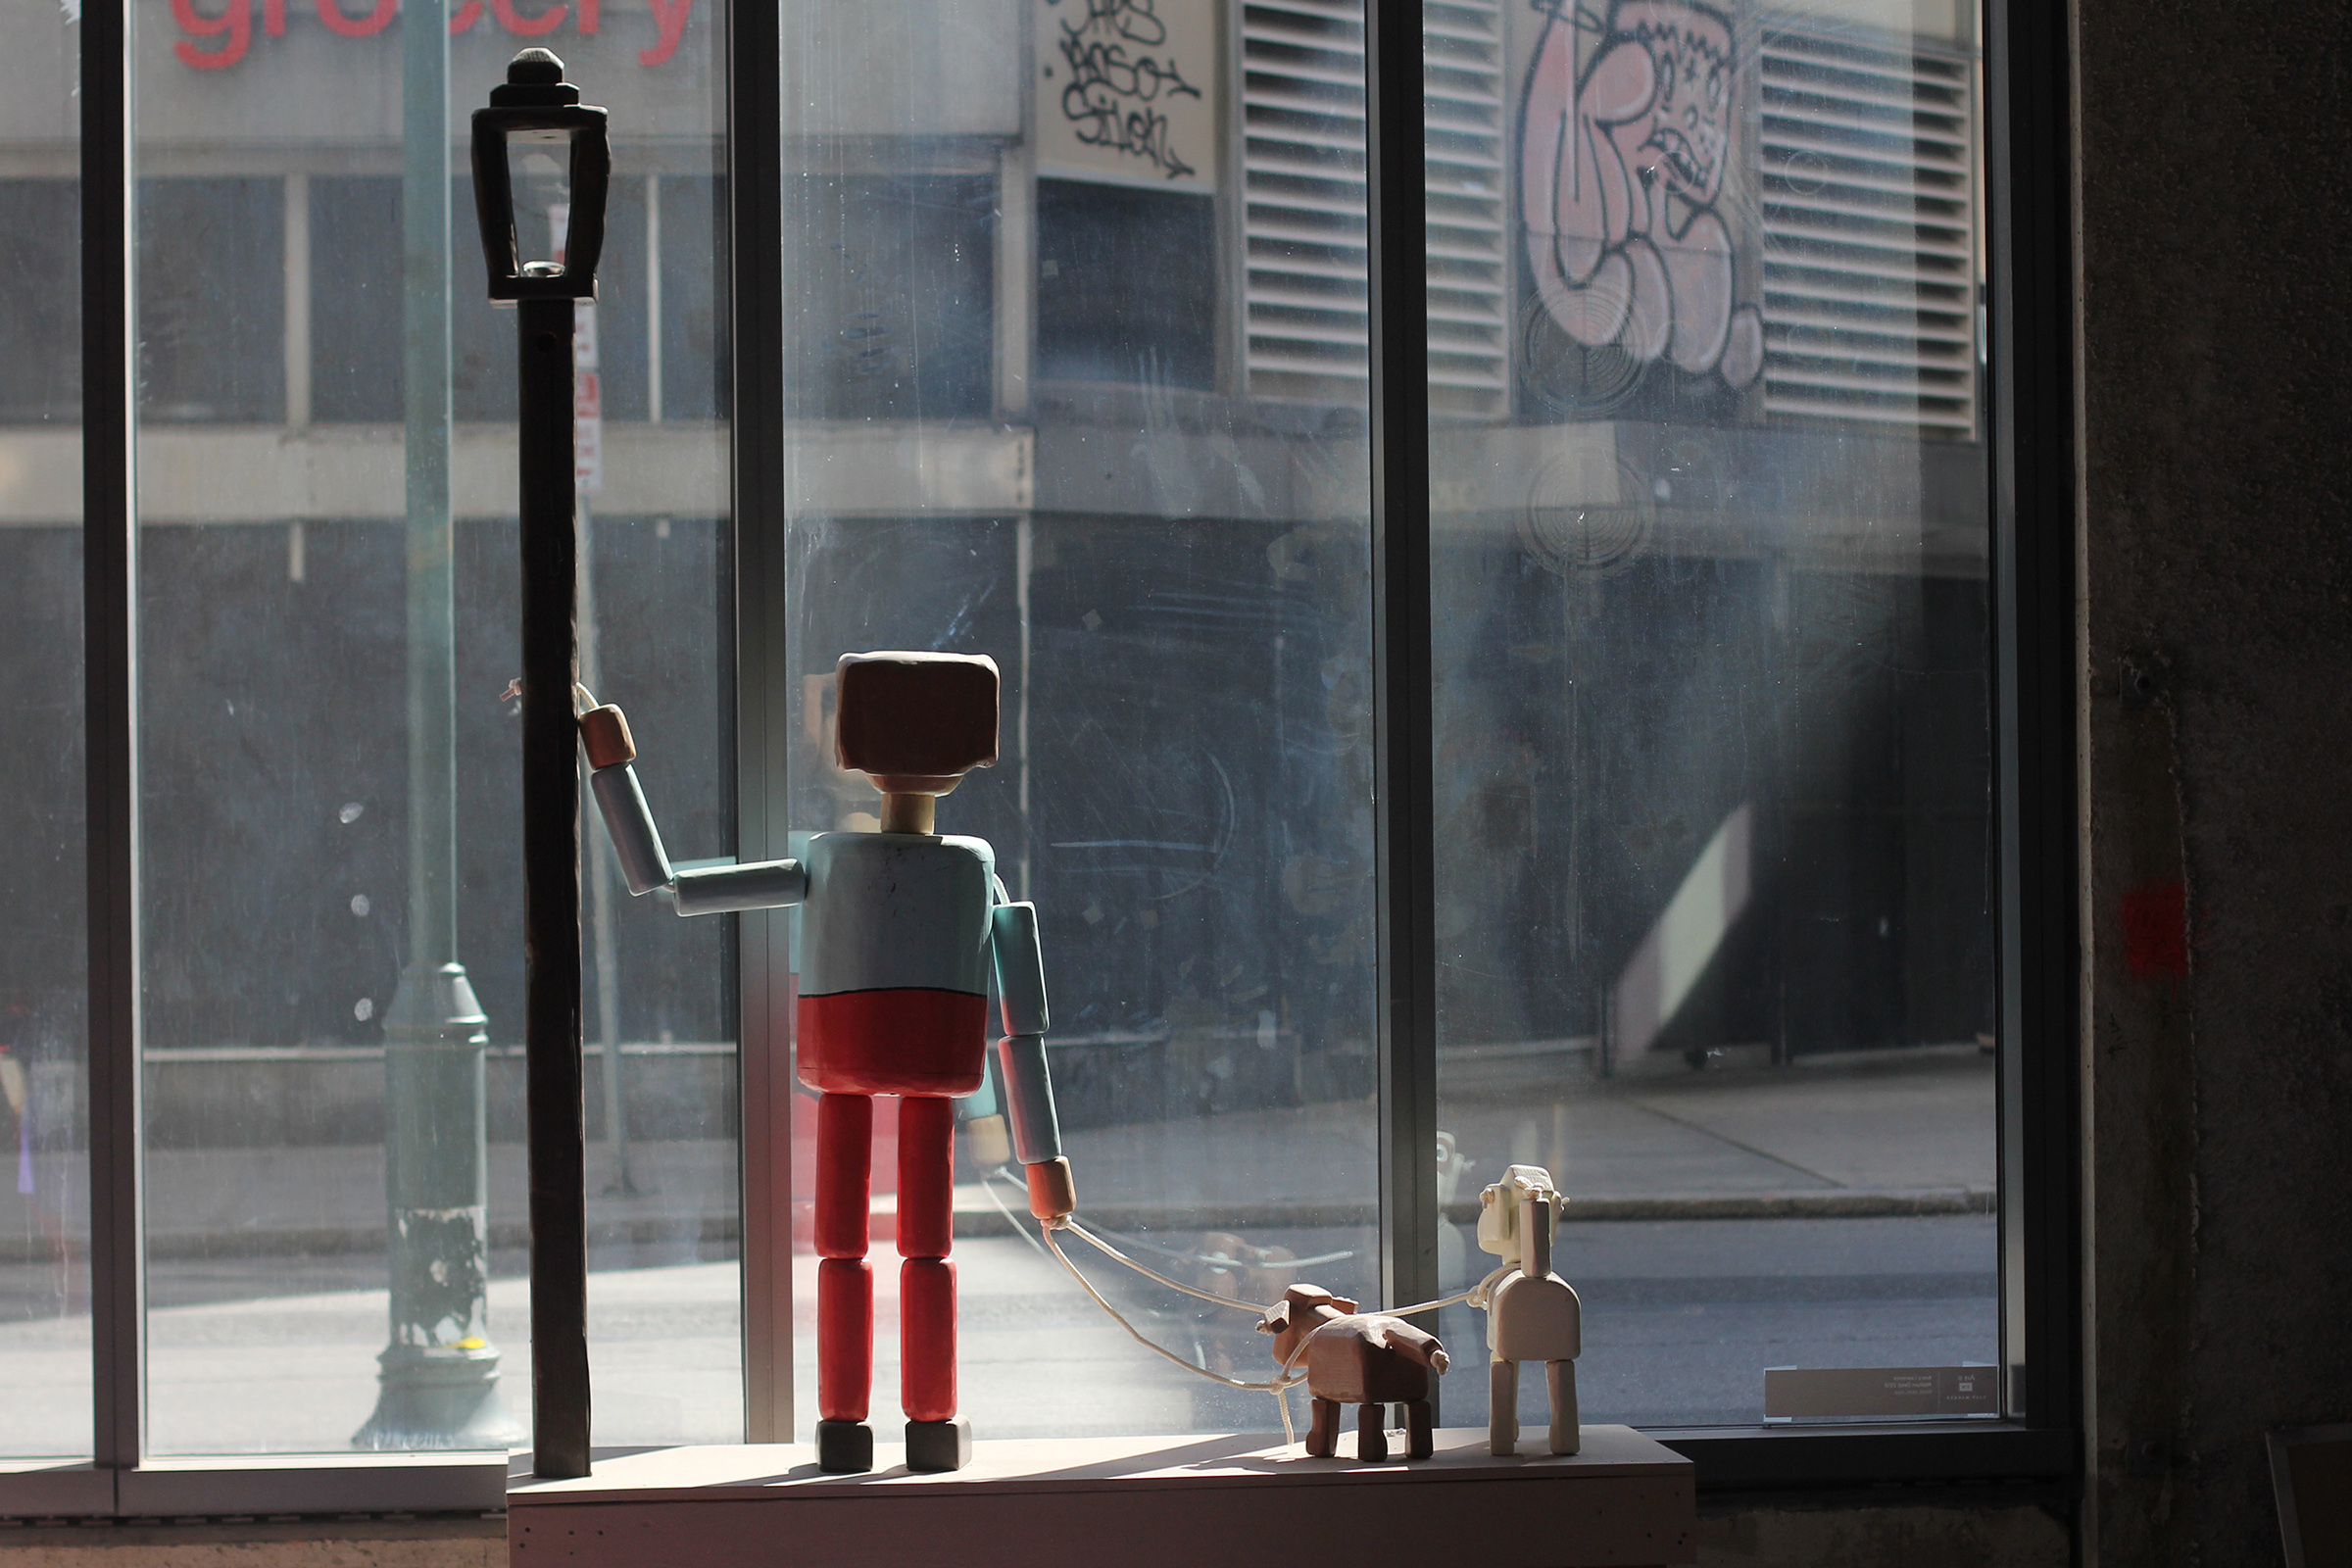 A photograph from the backside of a life-size, wooden sculpture painted to look like a person walking two dogs in a window display. The person and the dogs resemble push puppet toys.